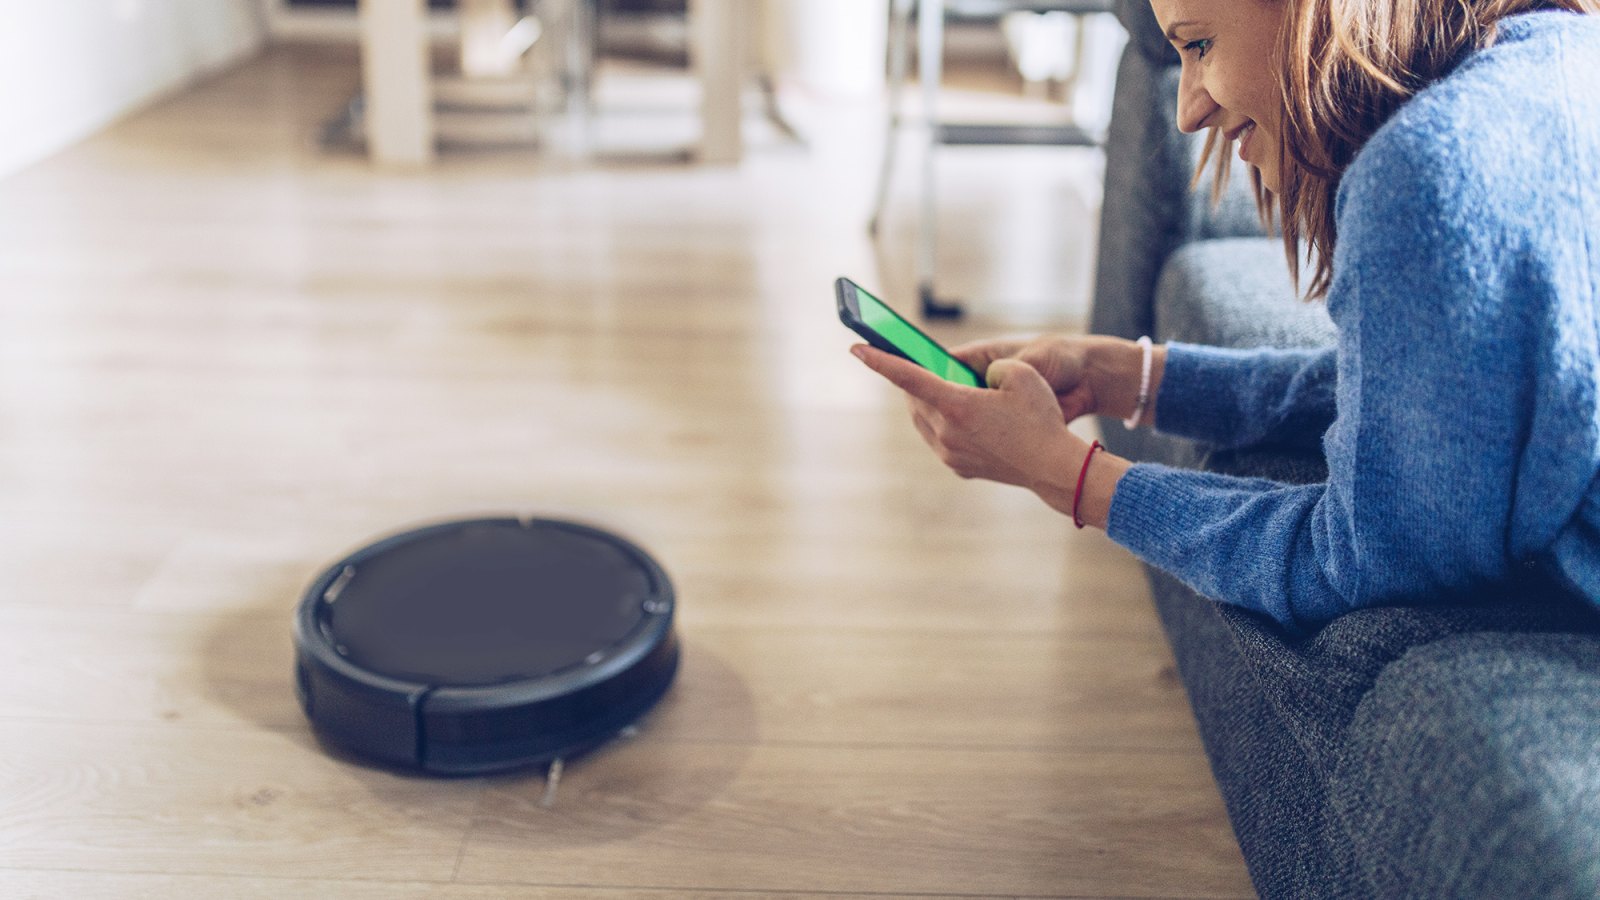 s Black Friday Deals on Roombas Are Up to 42% Off